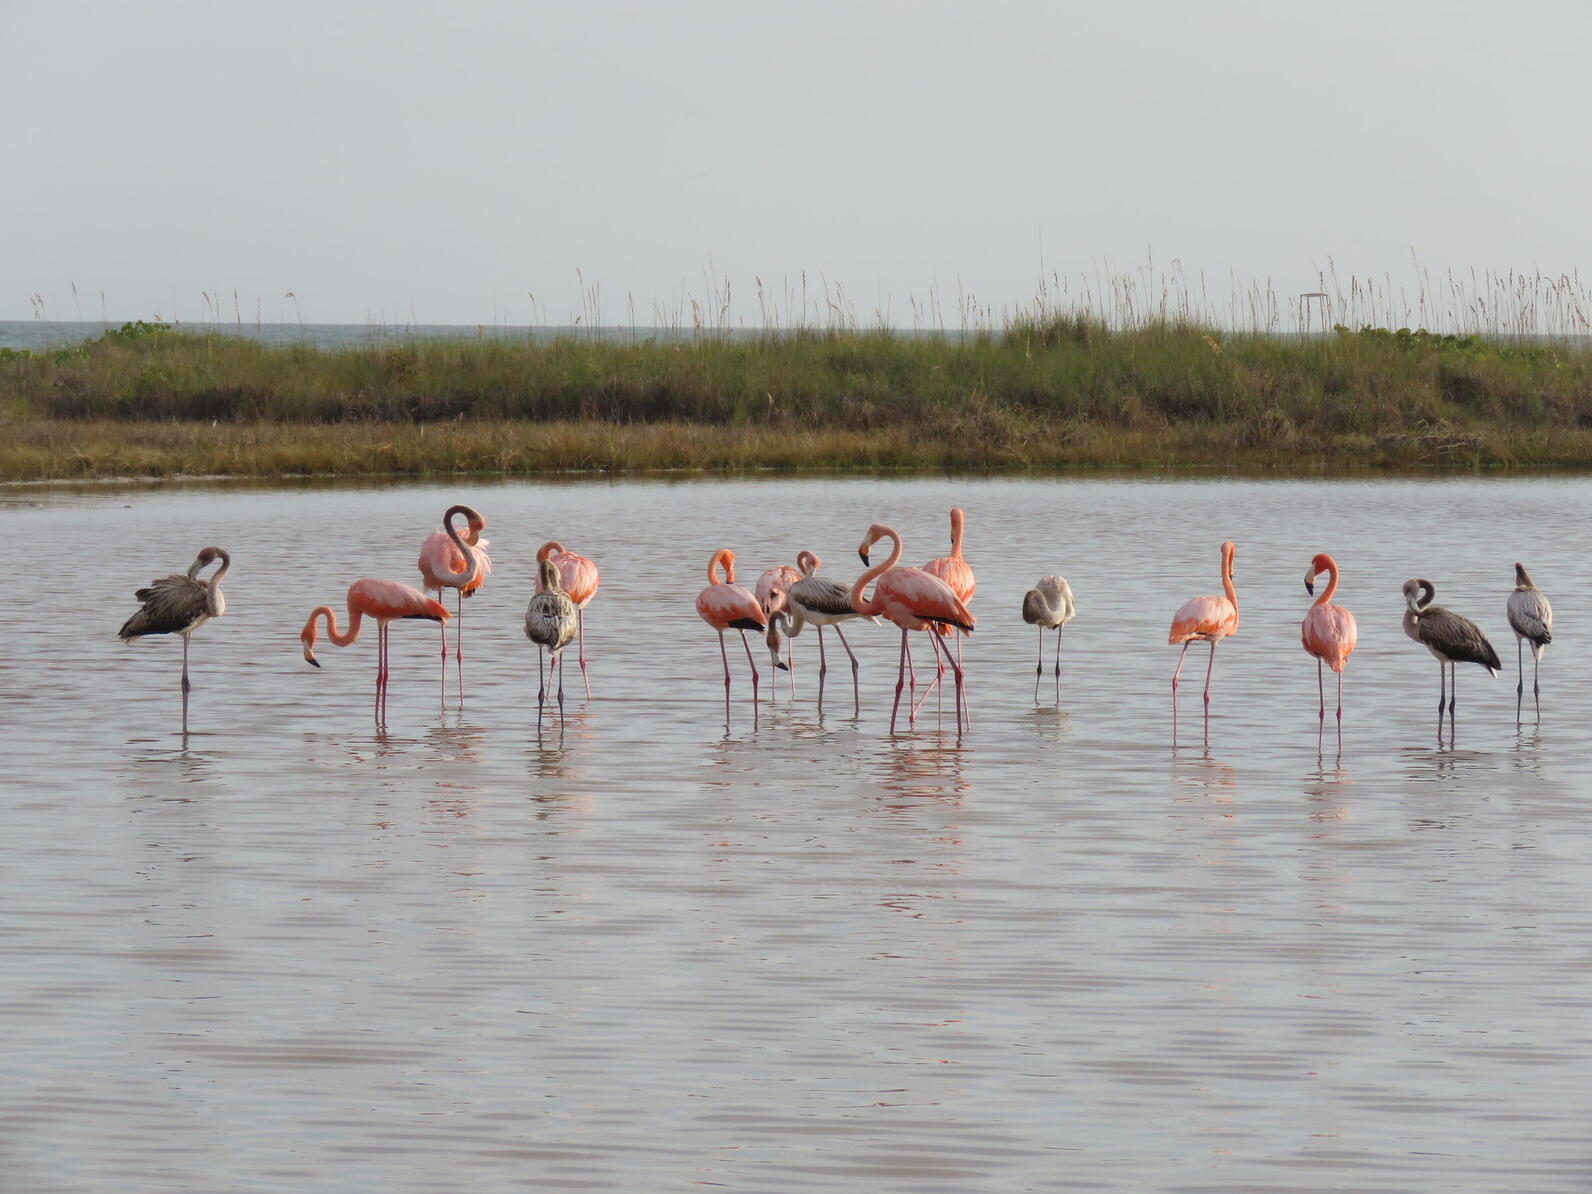 A flock of Flamingos wade in shallow water.